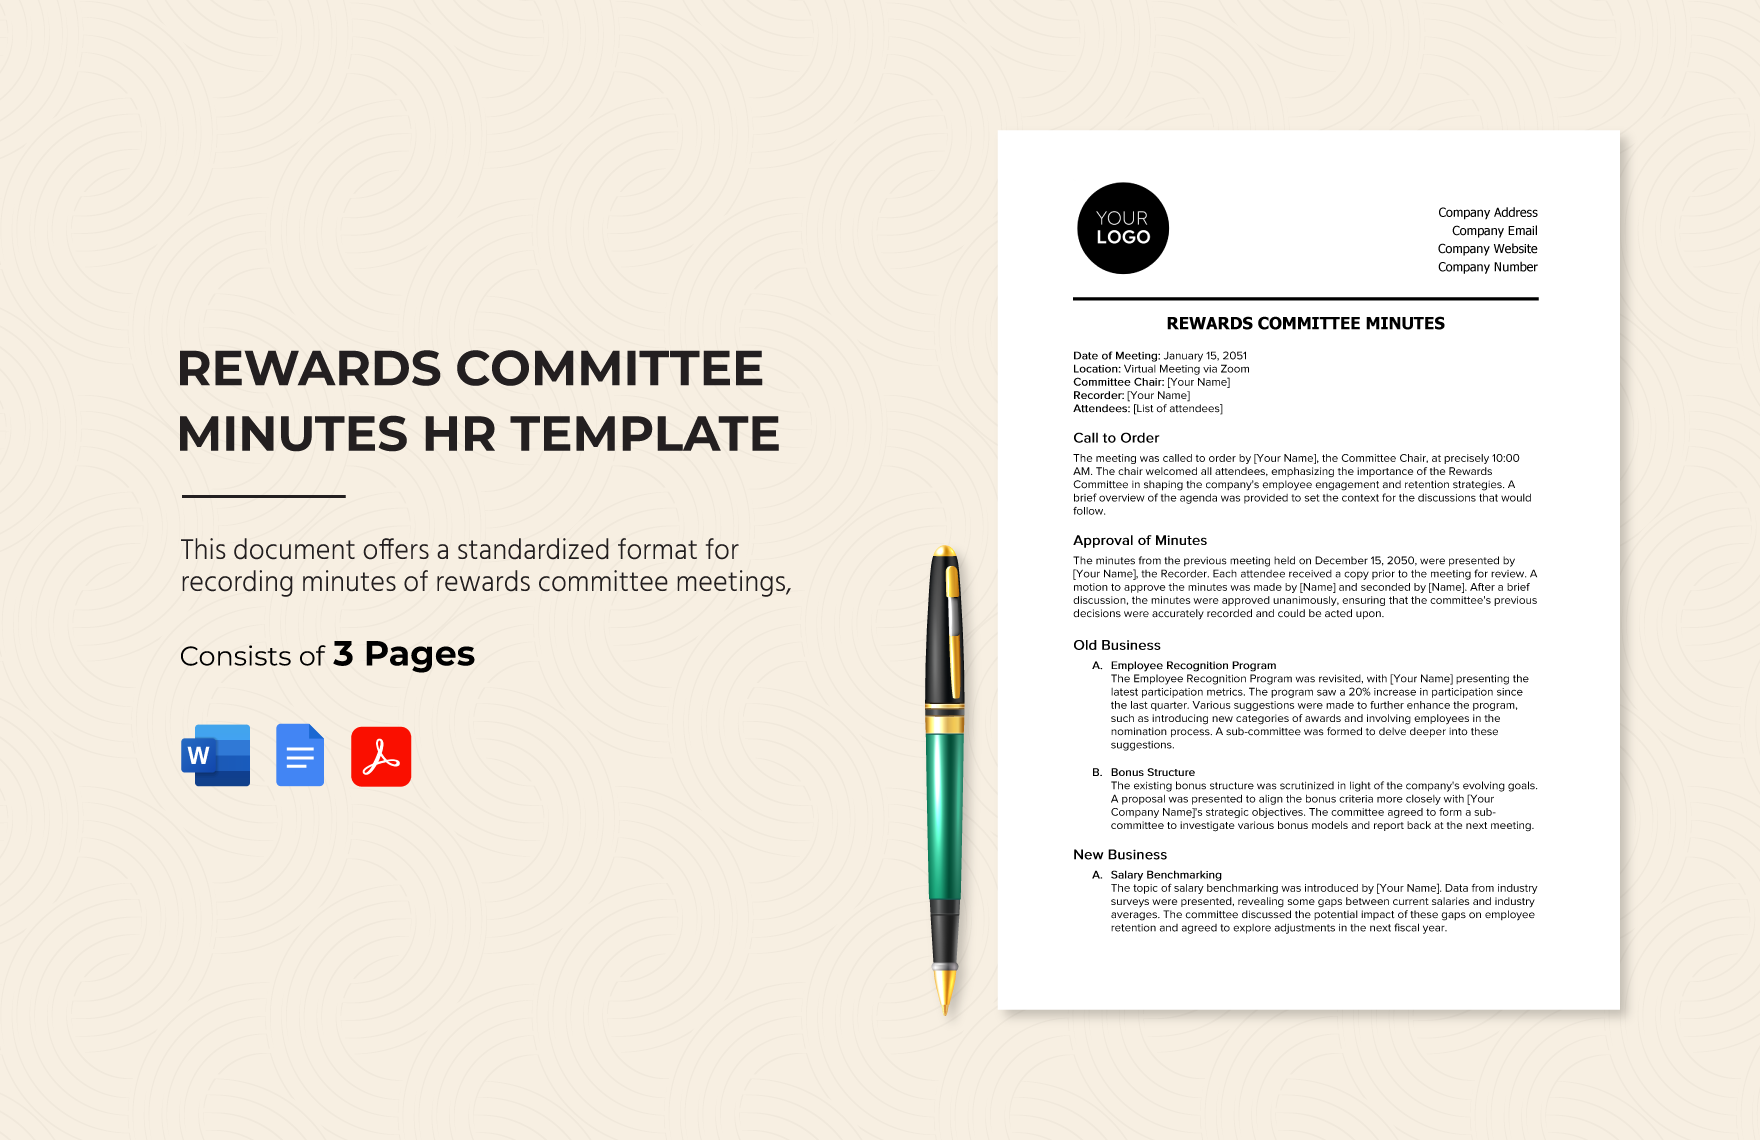 Rewards Committee Minutes HR Template